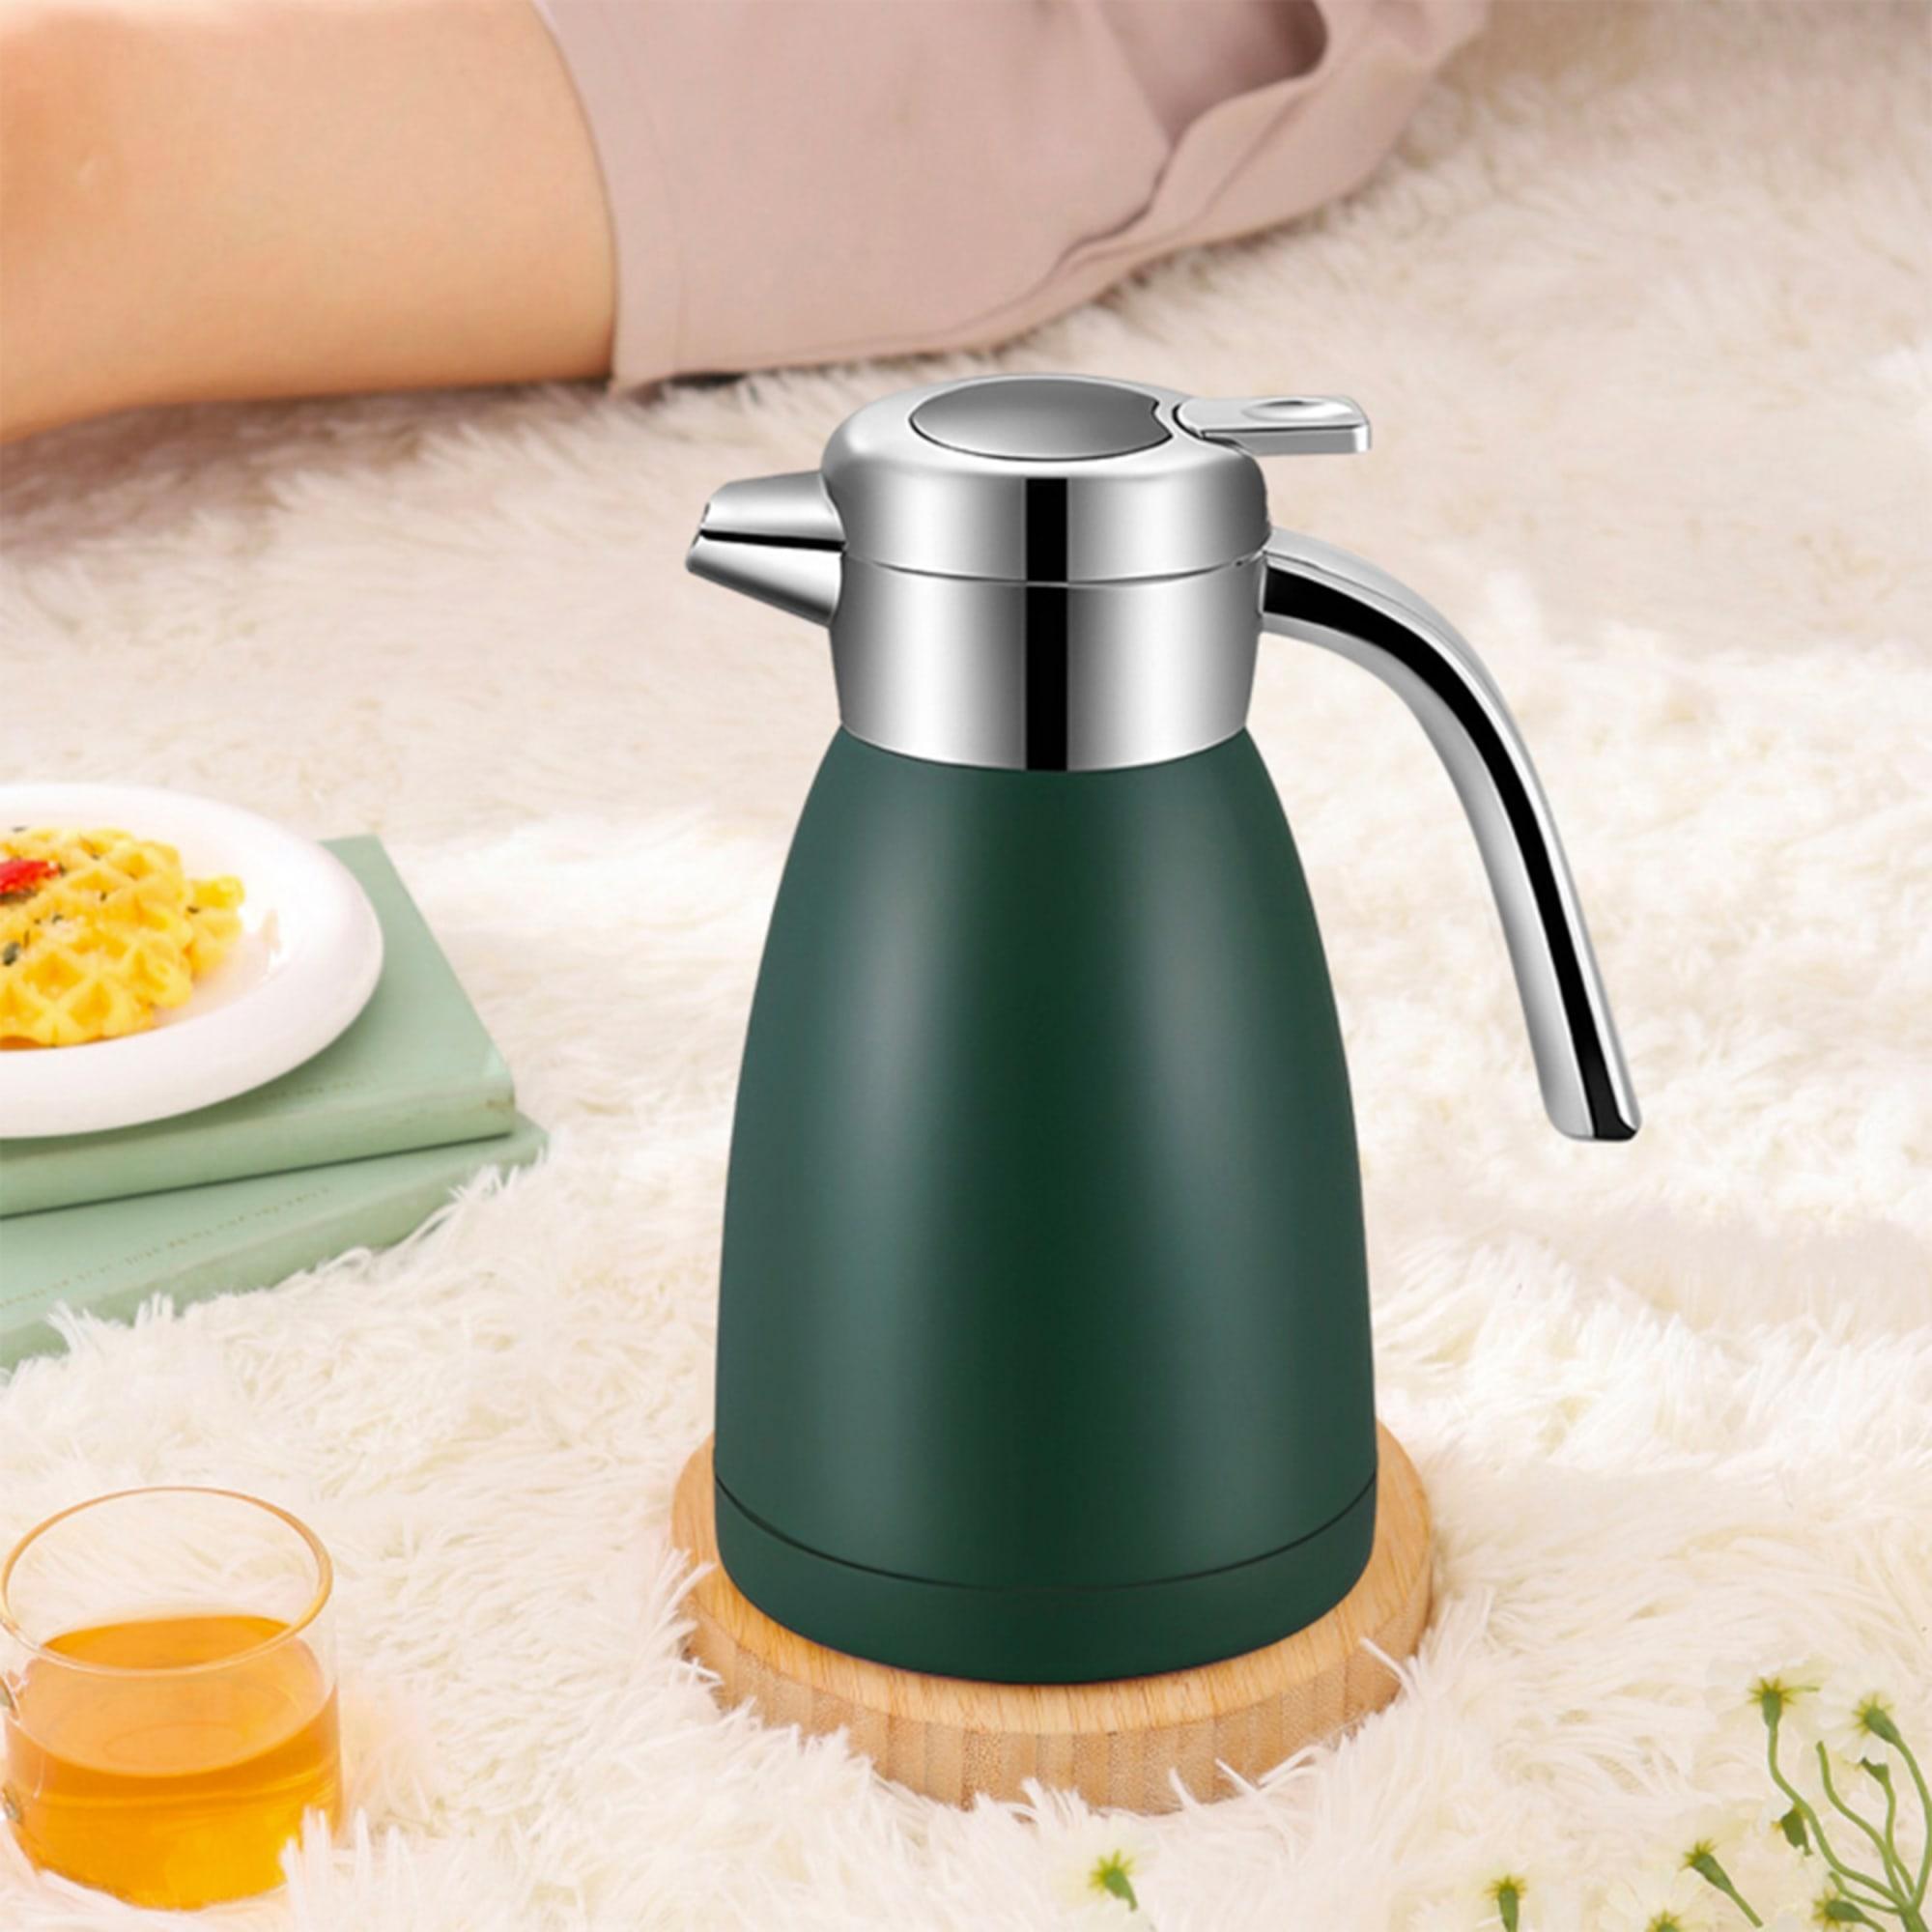 Soga Stainless Steel Insulated Kettle 2.2L Green Image 3